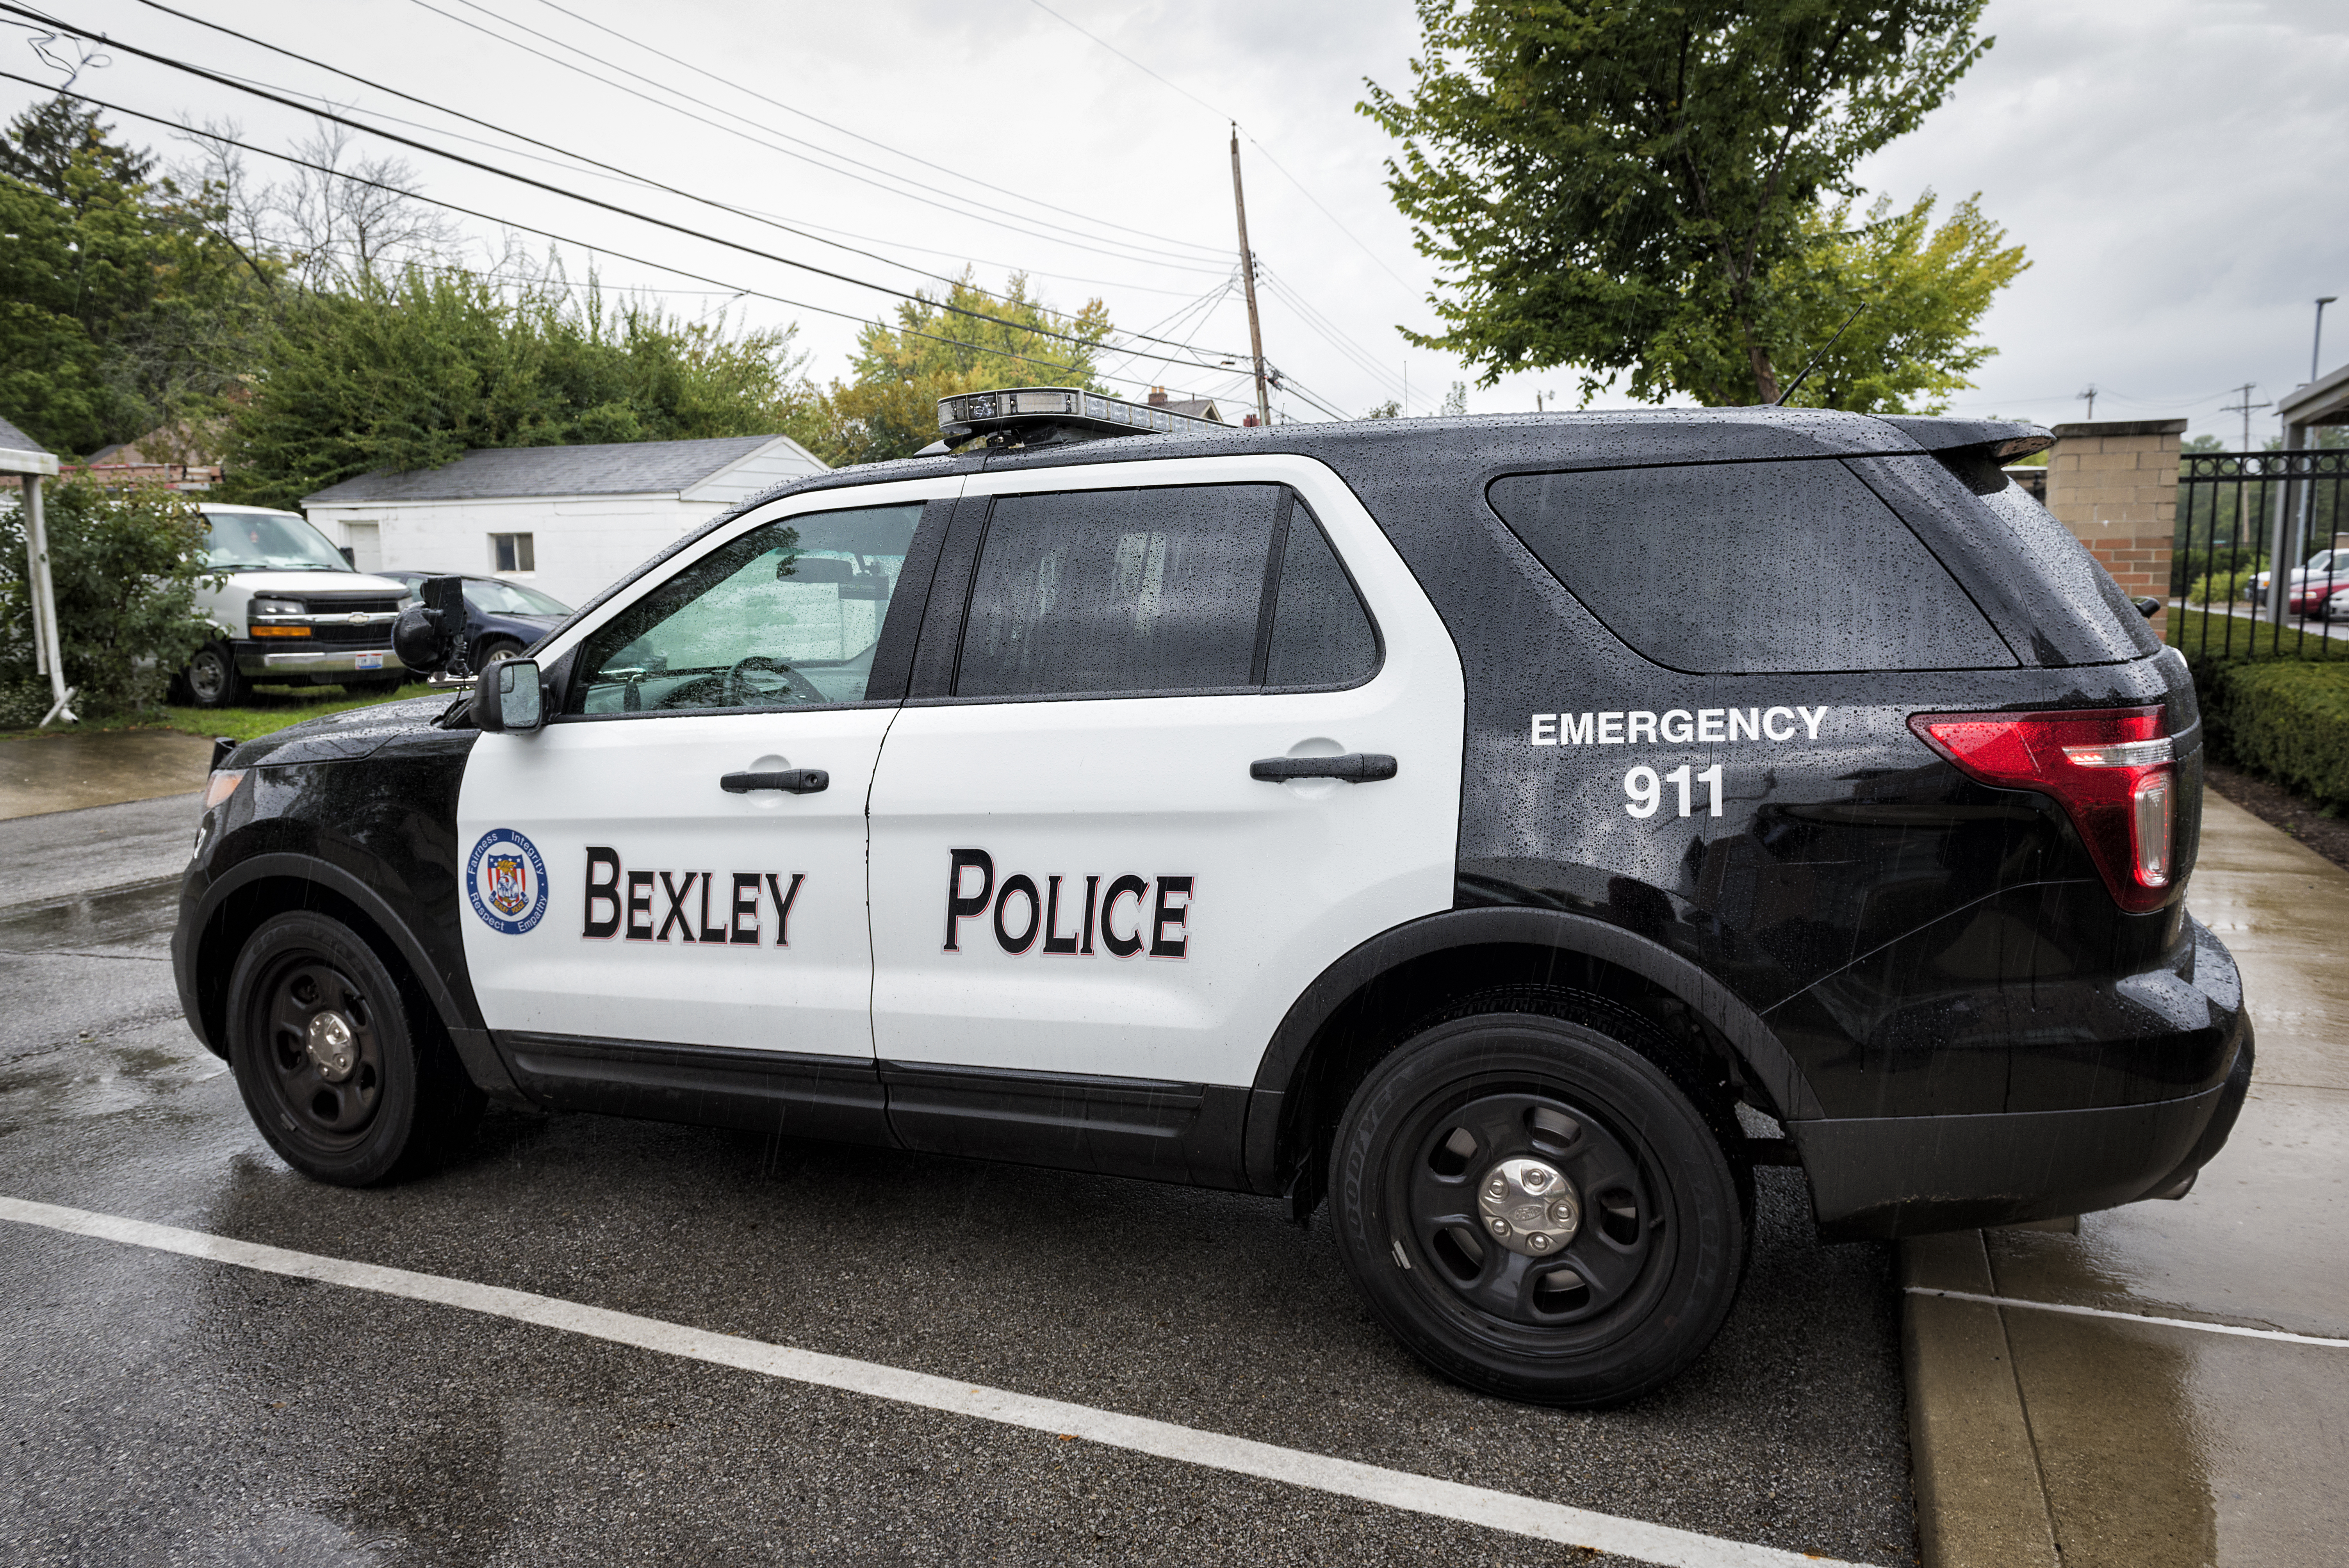 Car-related crimes in Bexley